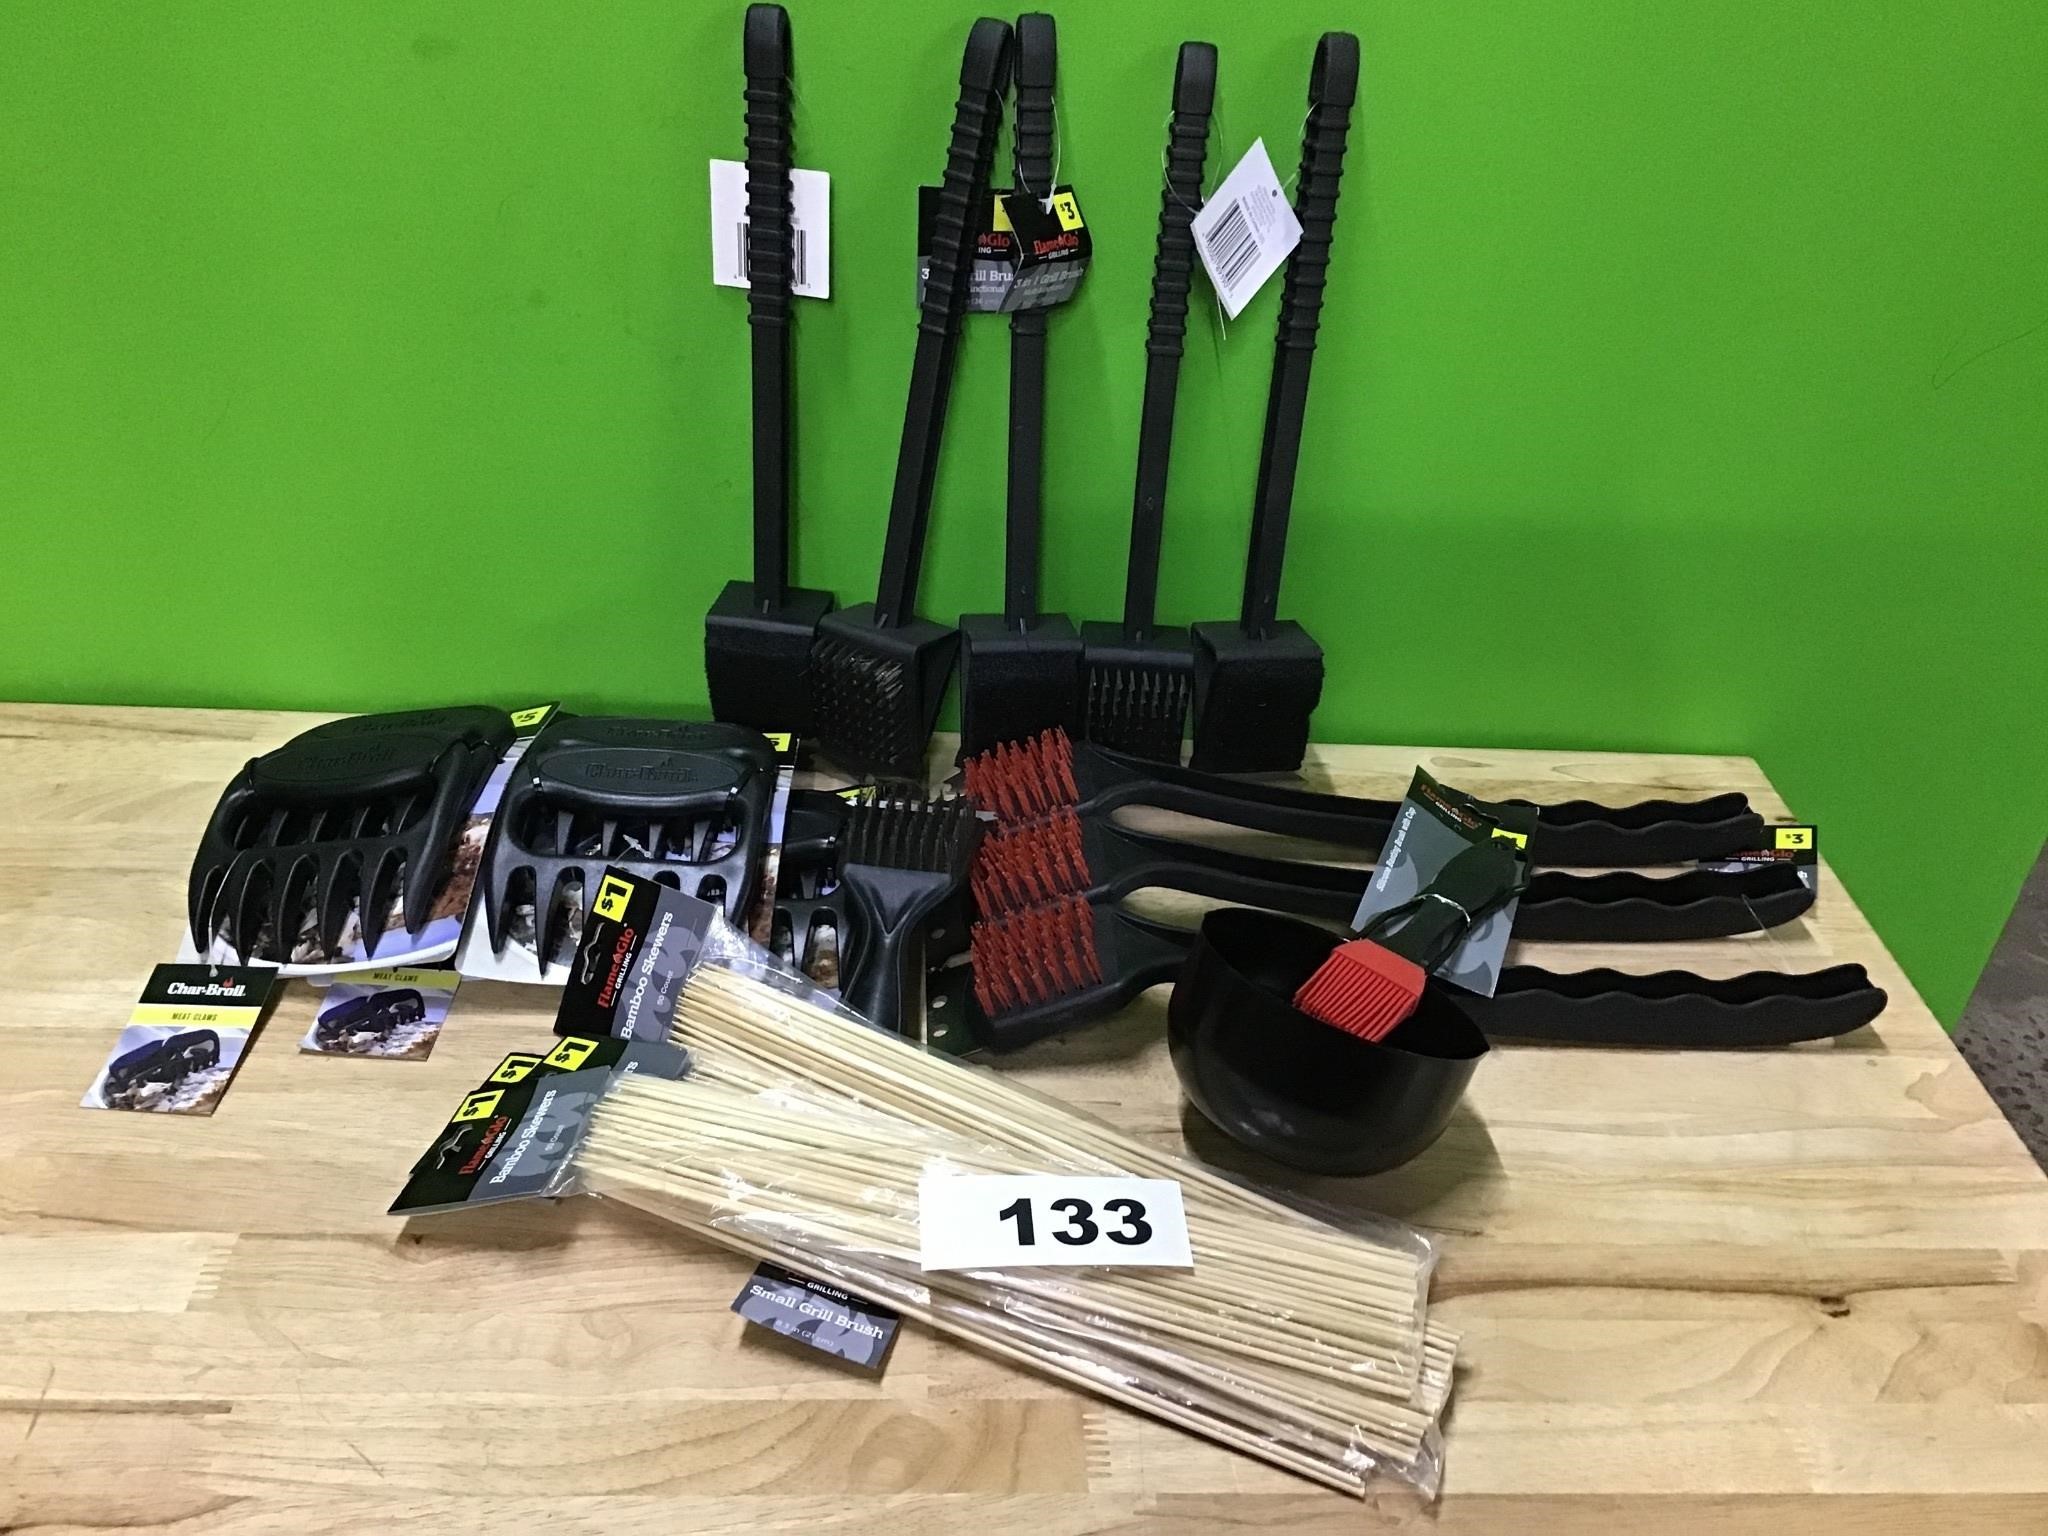 Grilling Accessories lot of 18